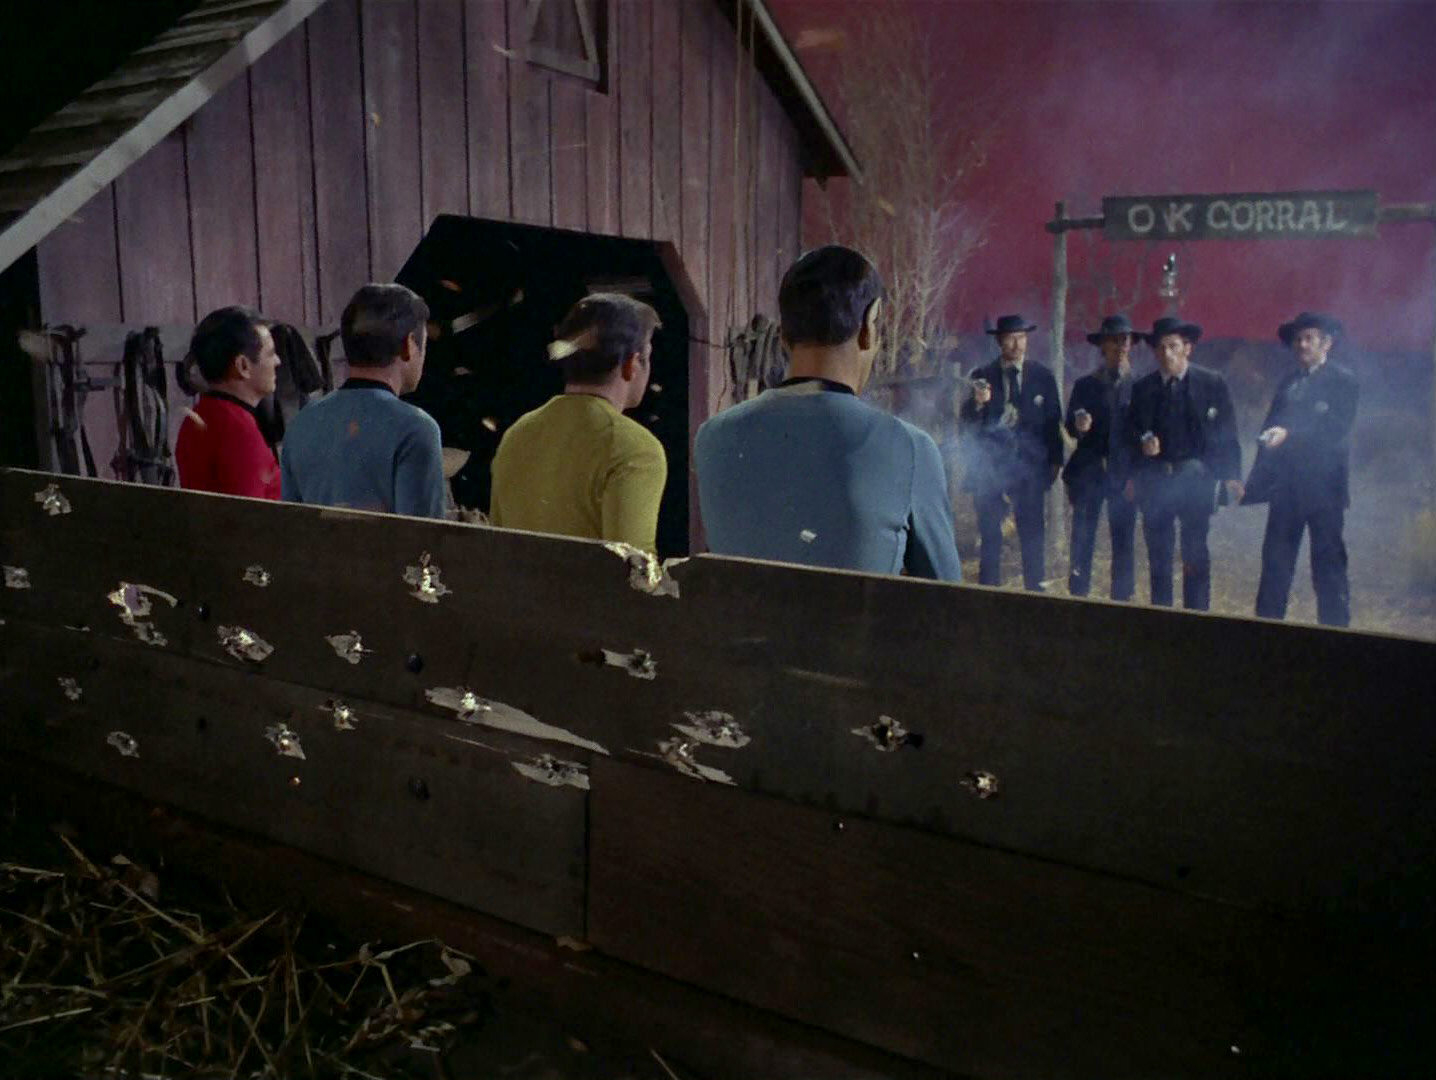 A still from Star Trek episode 'Spectre of the Gun', showing four Star Trek crew members from behind (Spock is closest to the camera, with Kirk to his left), backs against some wooden boards which are riddled with bullet holes. Across from them, four cowboys stand with guns raised, firing at them. A sign above their heads reads 'OK CORRAL'.